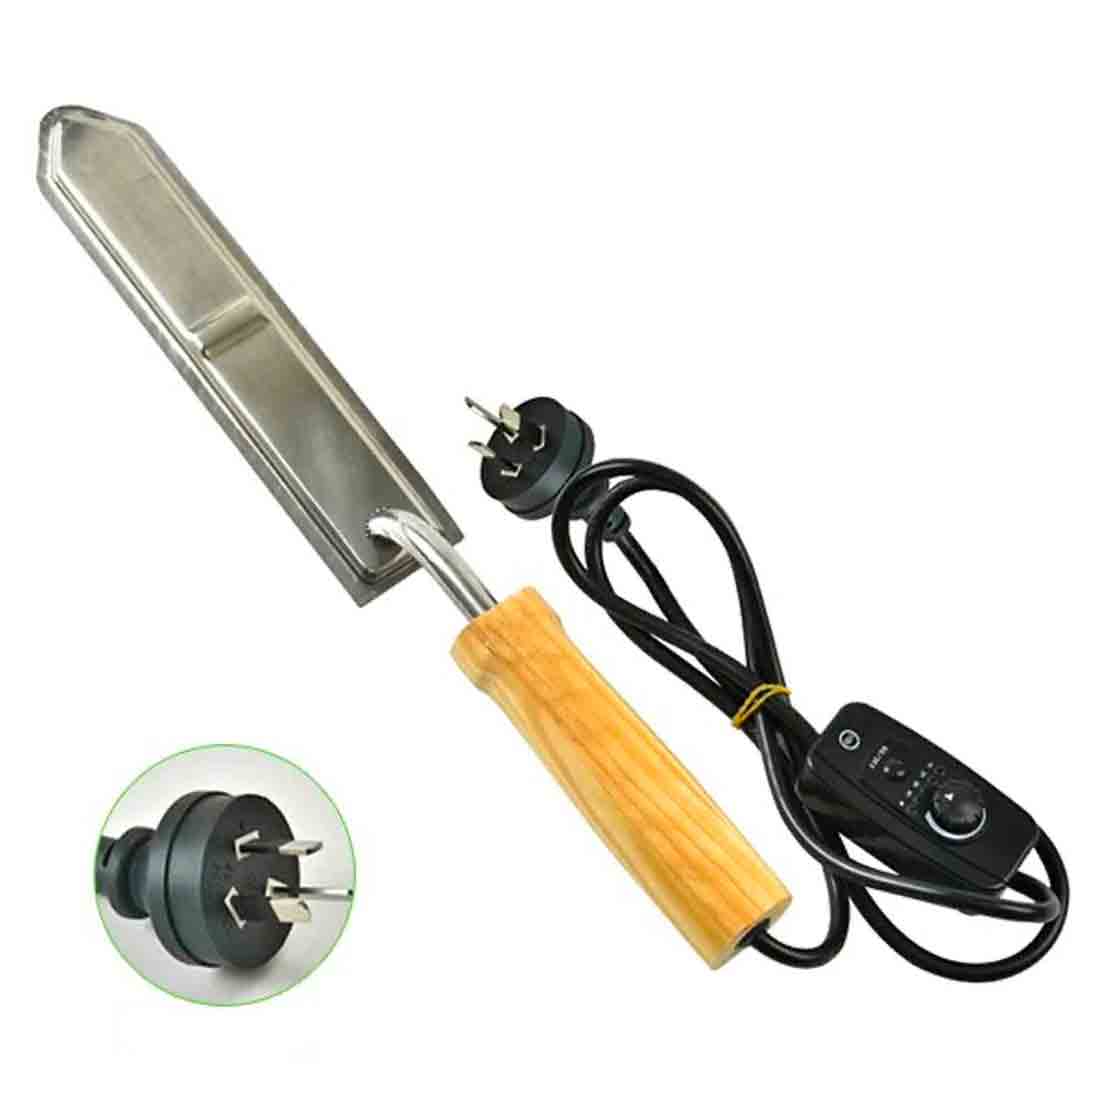 Heated Electric Uncapping Knife - Stainless Steel - Variable Control - Processing collection by Buzzbee Beekeeping Supplies